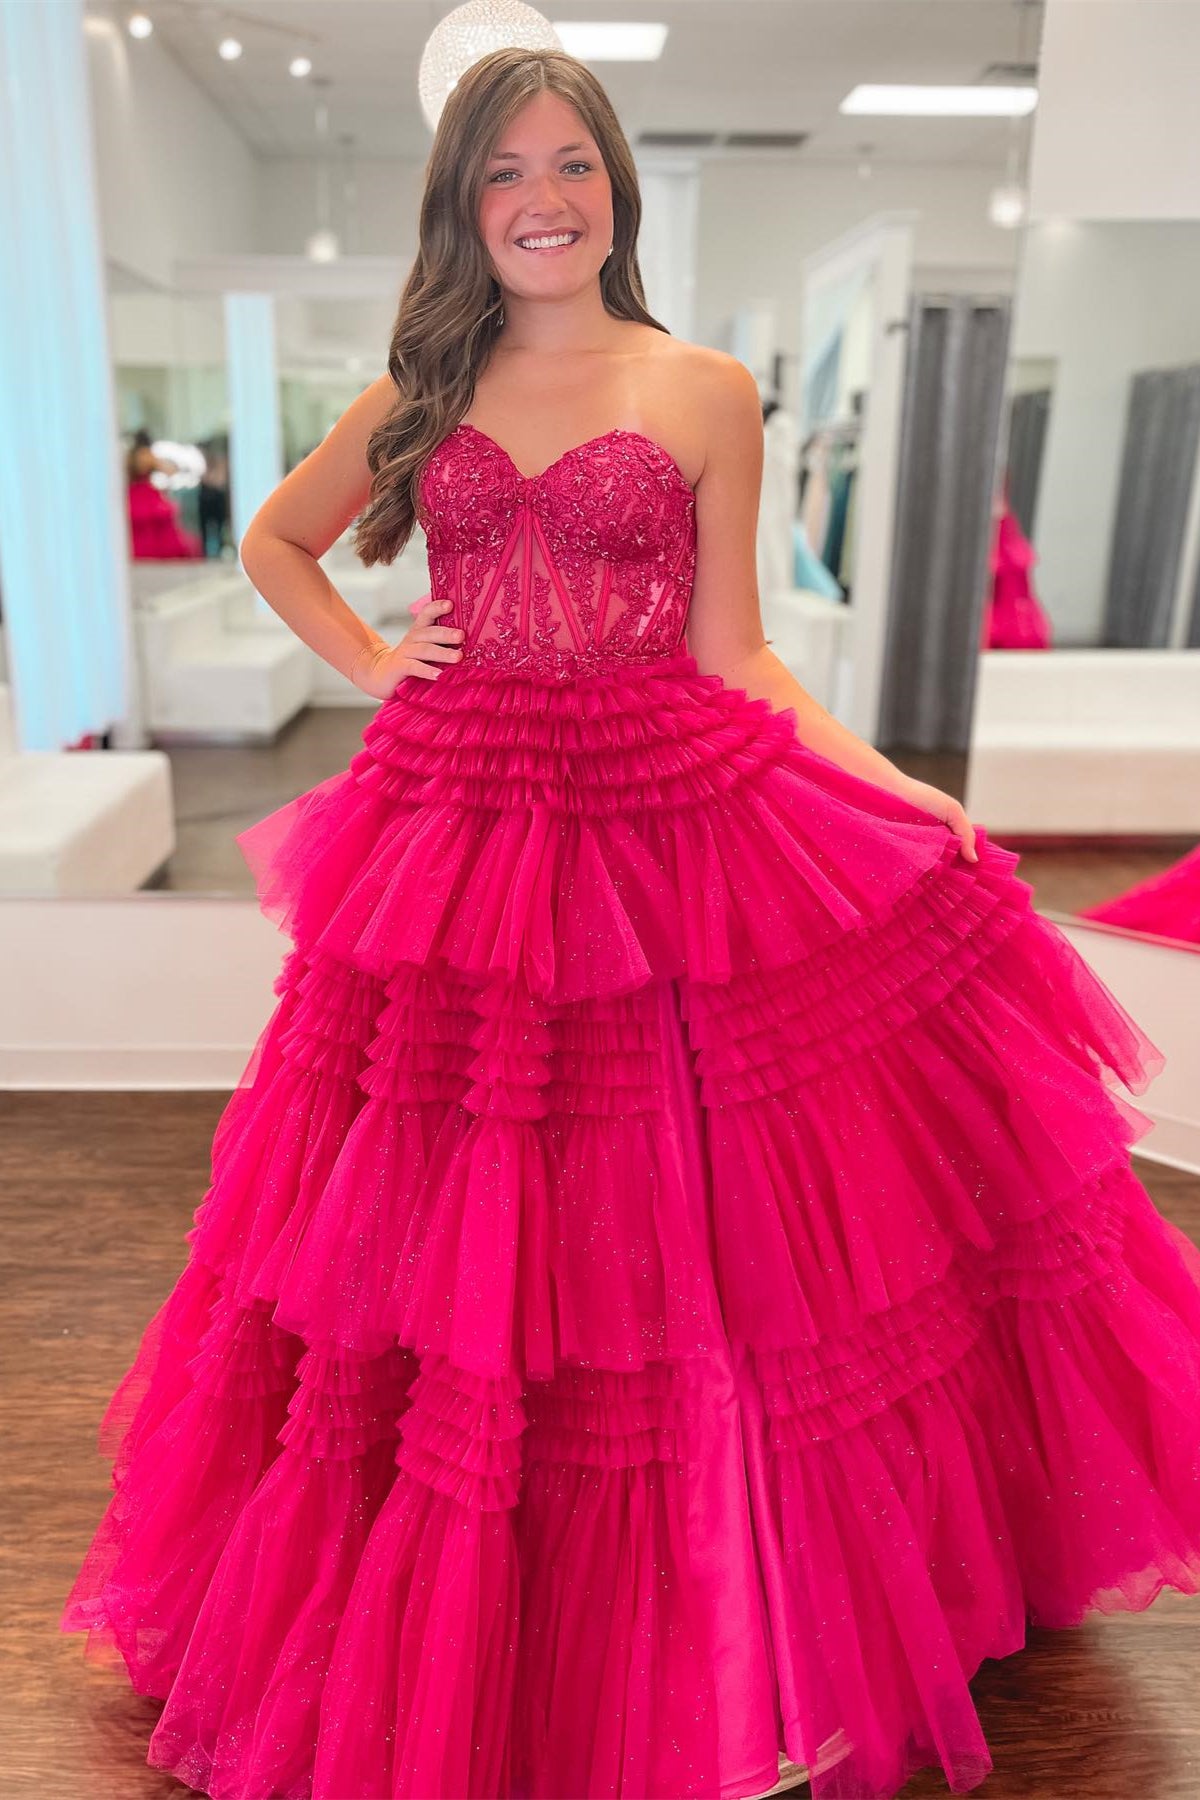 Fuchsia Multi-Layers Strapless Appliques A-line Tulle Long Prom Dress